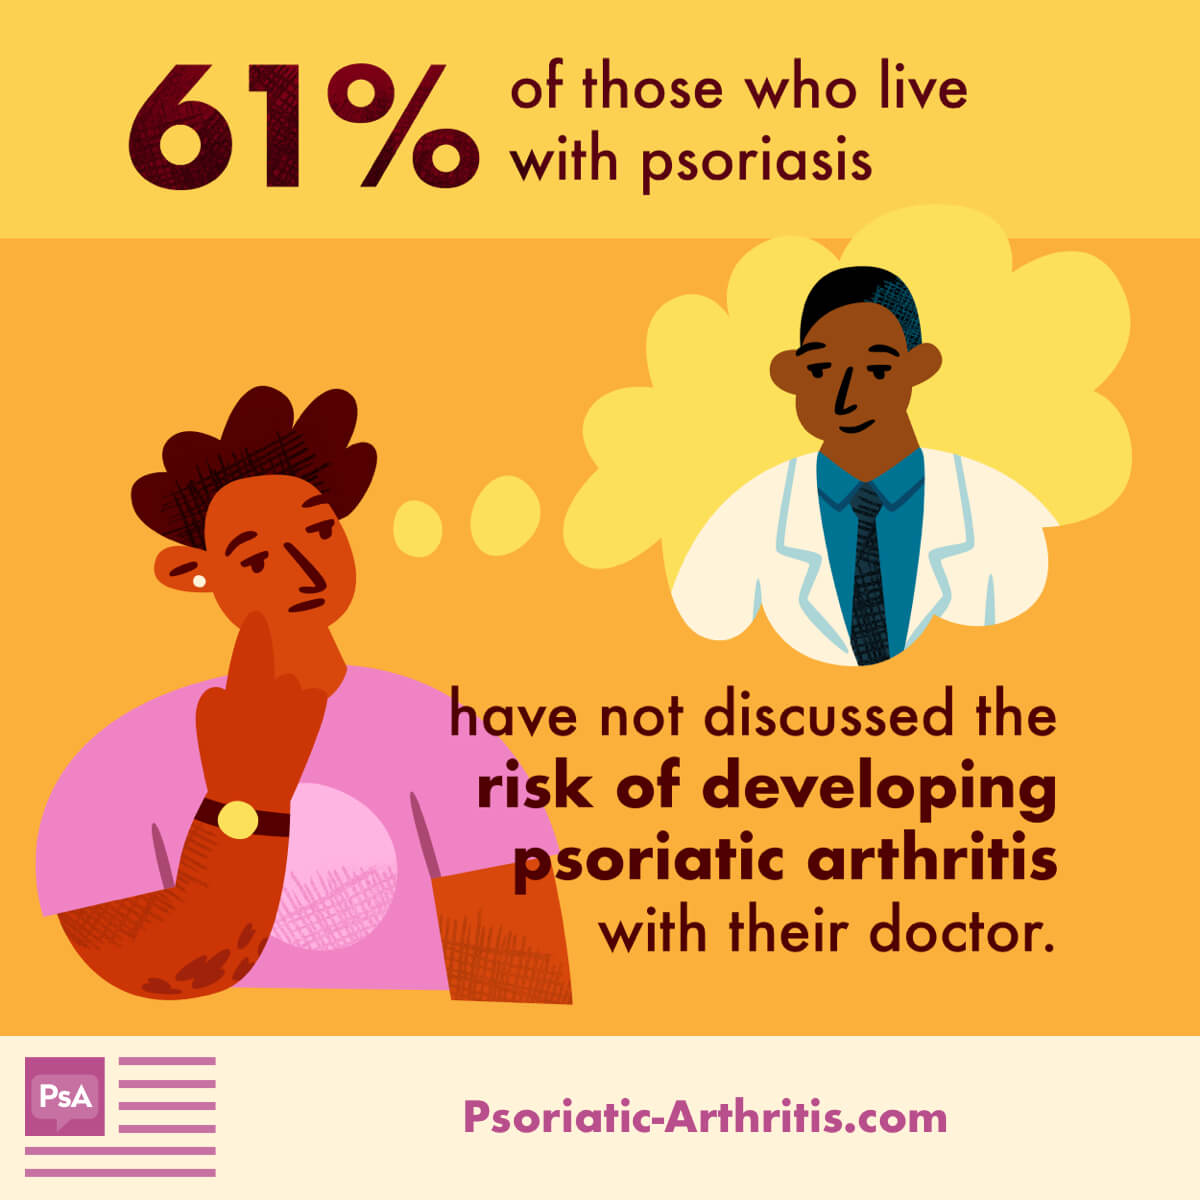 61% of those who live with psoriasis have not discussed the risk of developing psoriatic arthritis with their doctor.